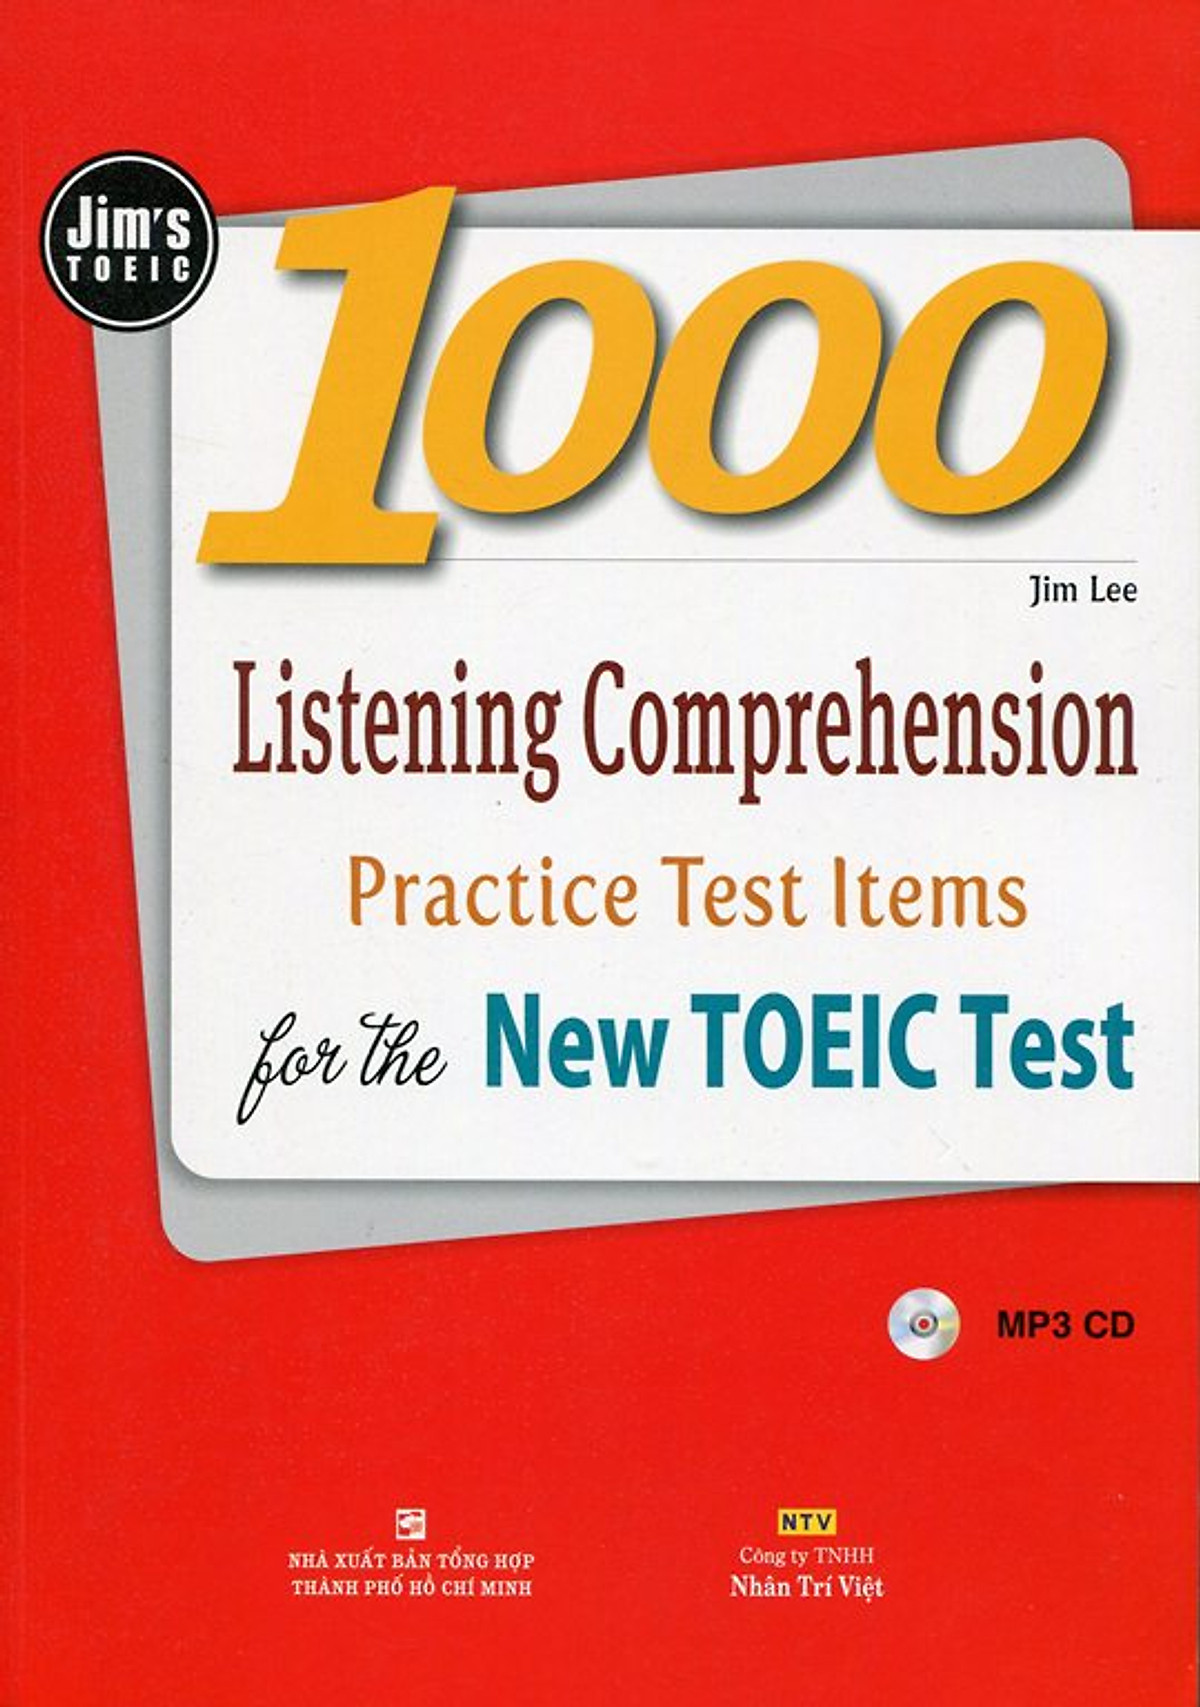 1000 Listening Comprehension Practice Test Items for the New Toeic Test (Kèm file MP3) - Tái Bản 2016